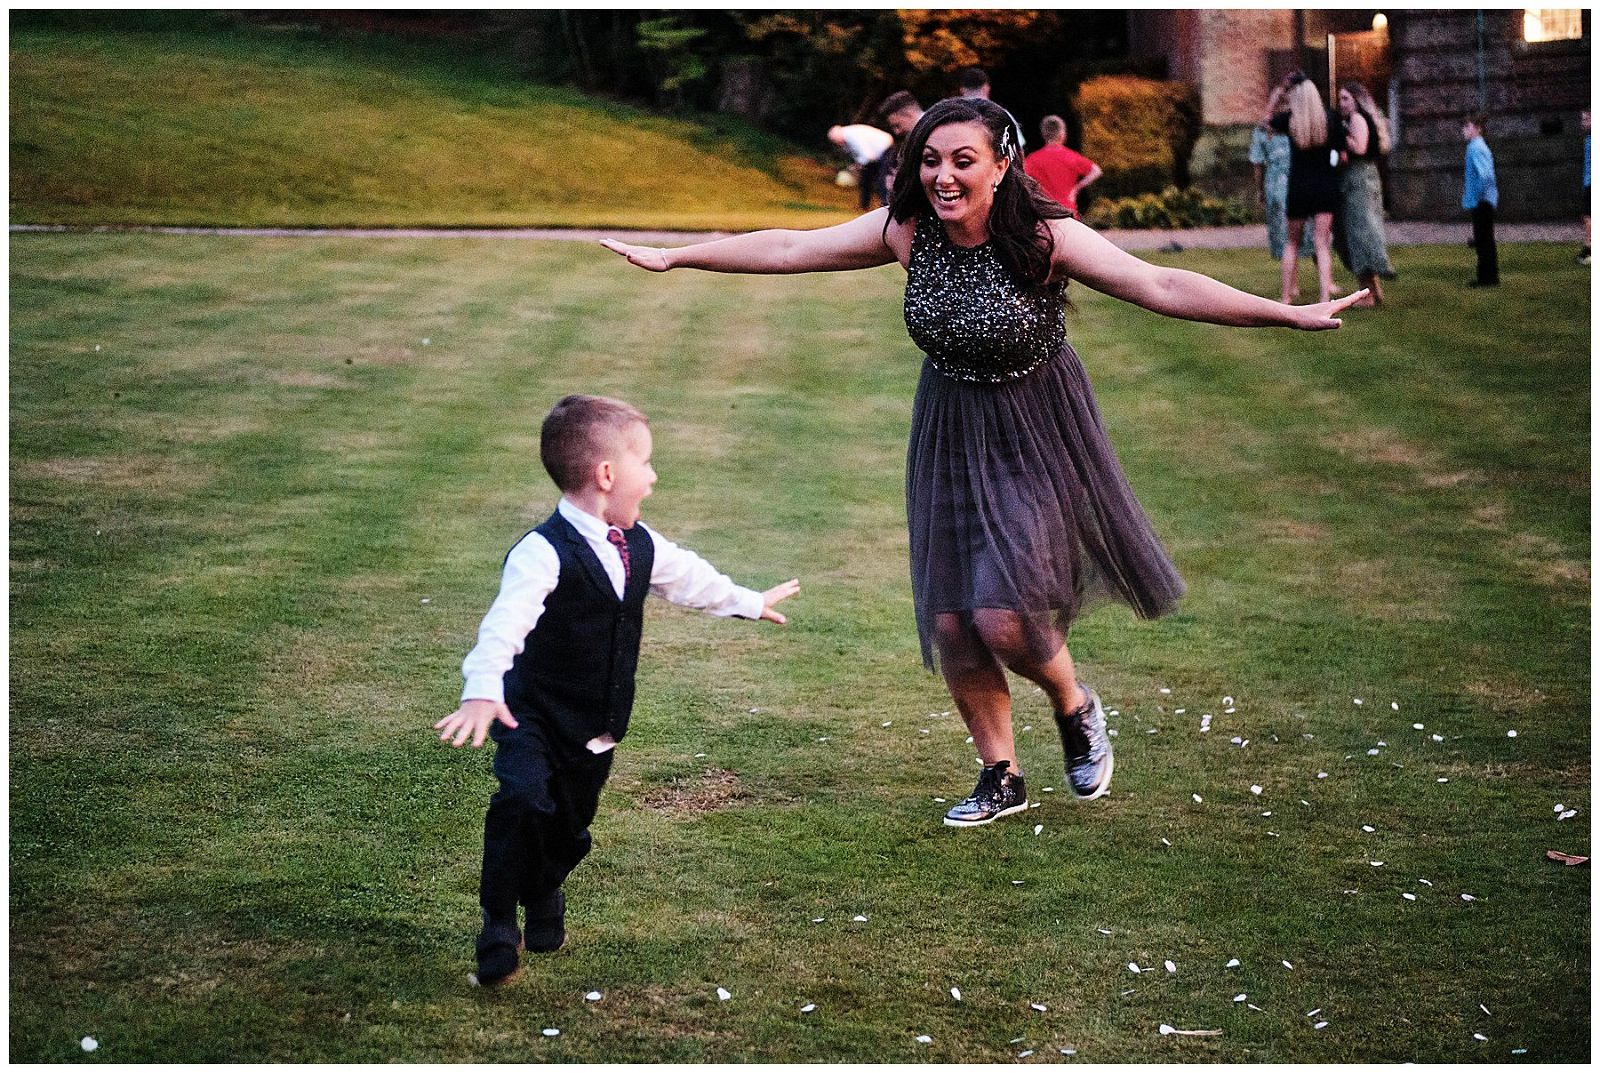 Brilliant fun as the guests enjoying the mild summer evening on the lawns at Hawkstone Hall in Shrewsbury by Documentary Wedding Photographer Stuart James